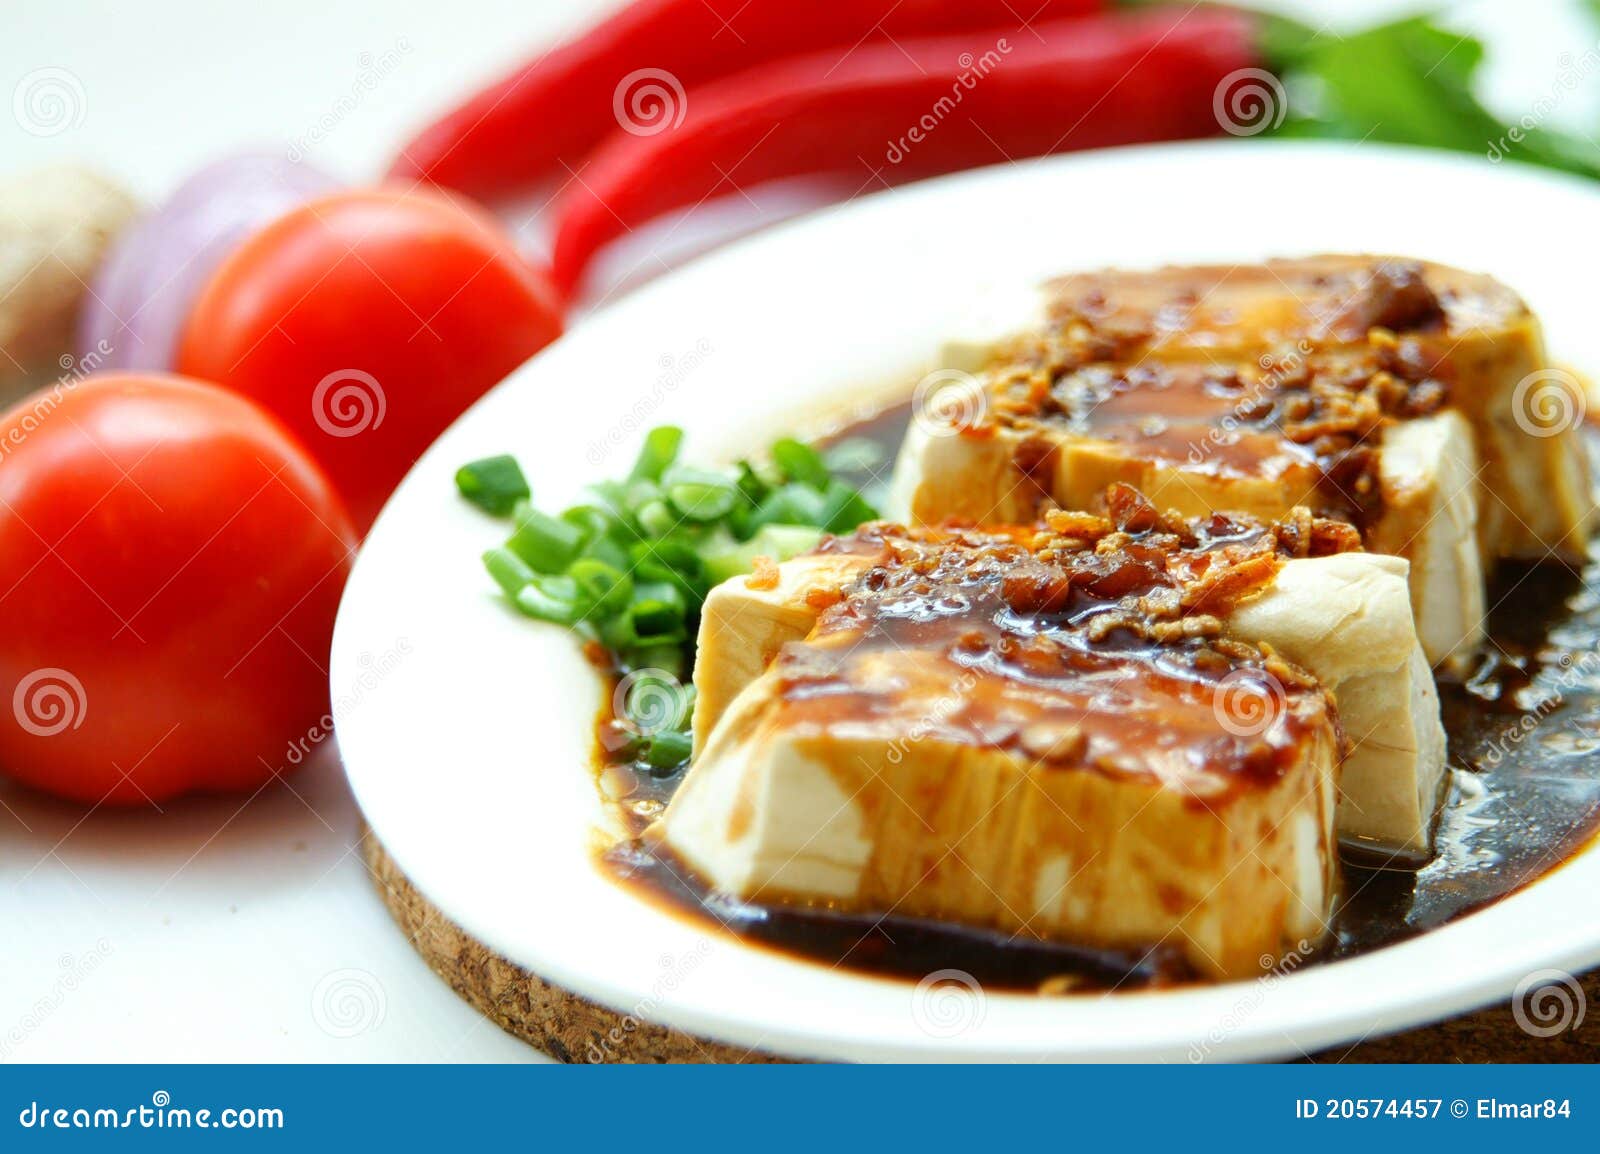 tofu in soy sauce